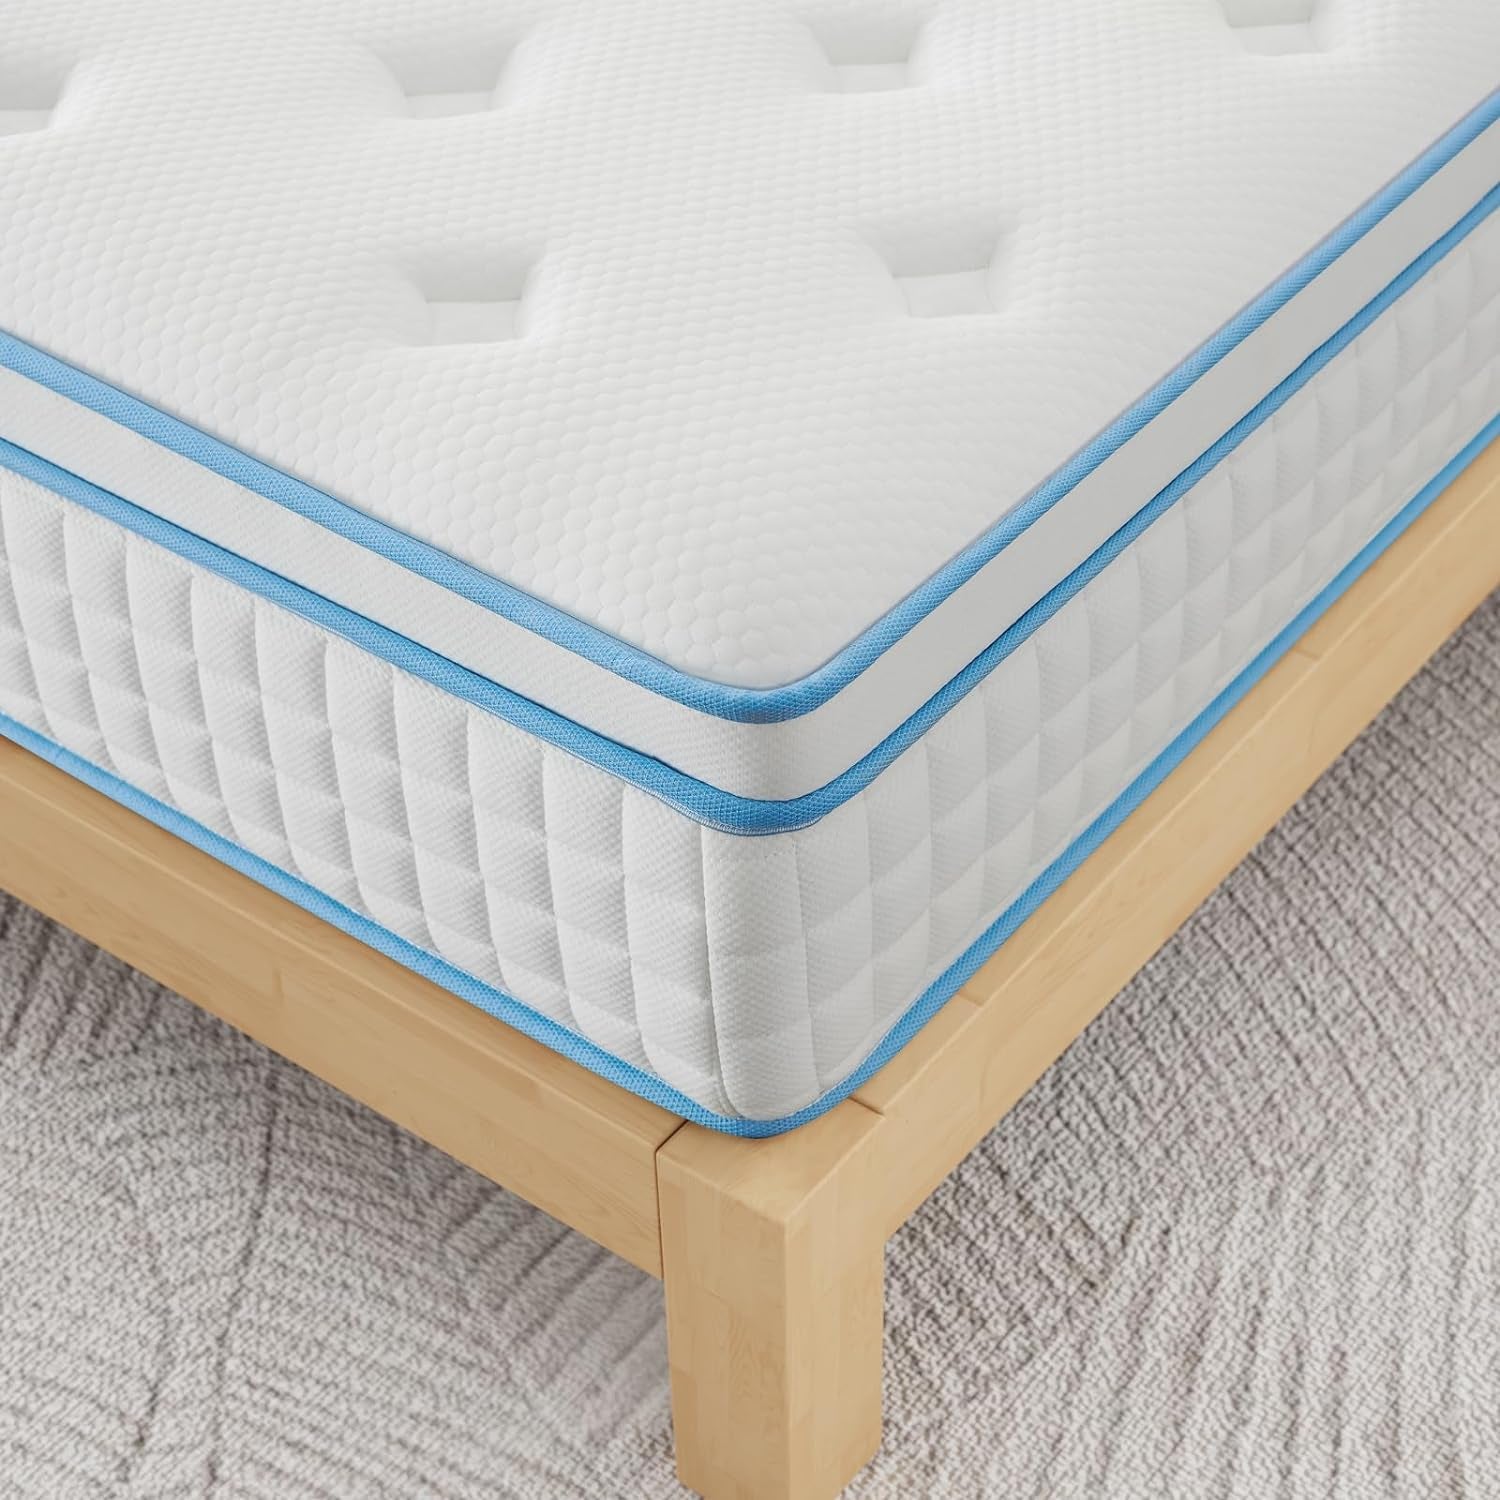 12 Inch Full Size Mattress,Cooling-Gel Memory Foam and Individually Pocket Innerspring Hybrid Bed Mattress